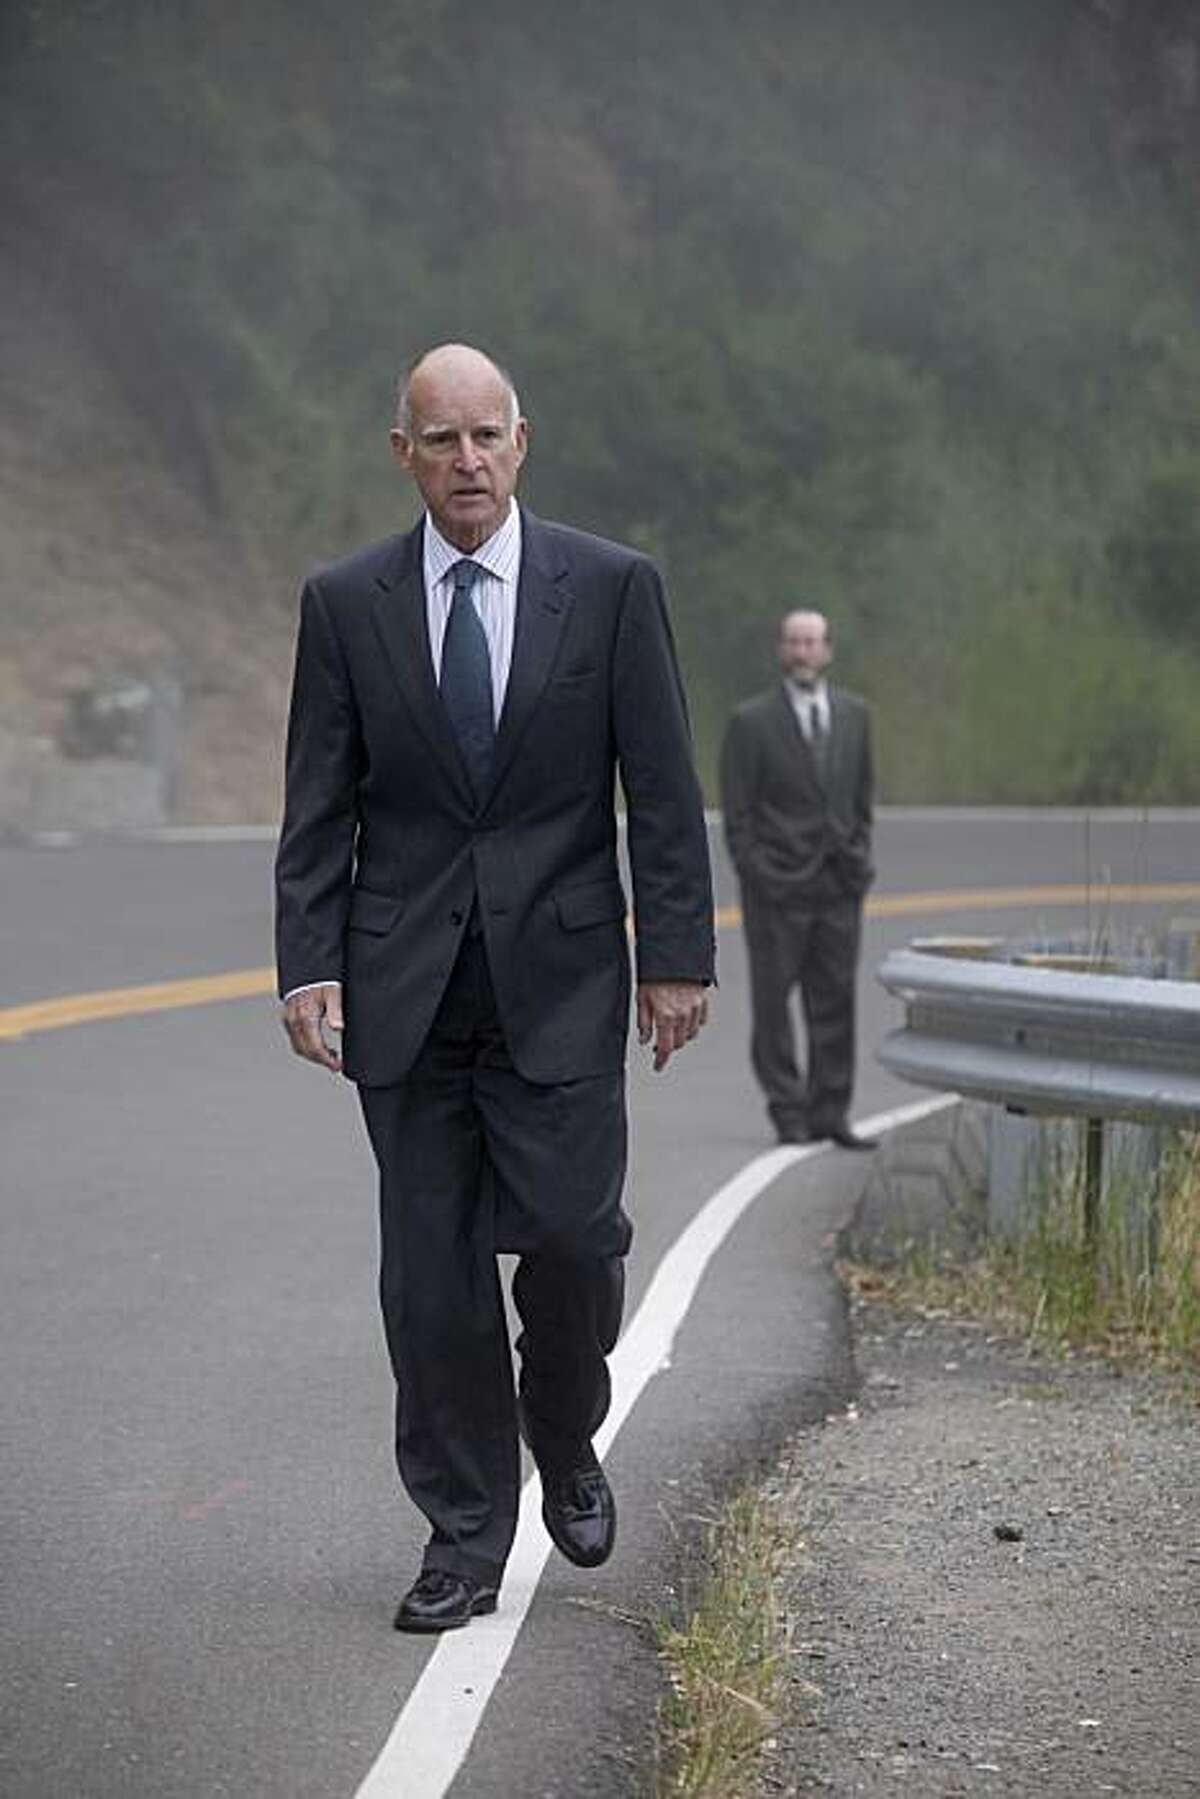 Joined by his campaign manager, Steven Glazer, California Attorney General Jerry Brown walks back to his Oakland hills home after voting in the primary election at Oakland Fire House No. 6 on Tuesday.